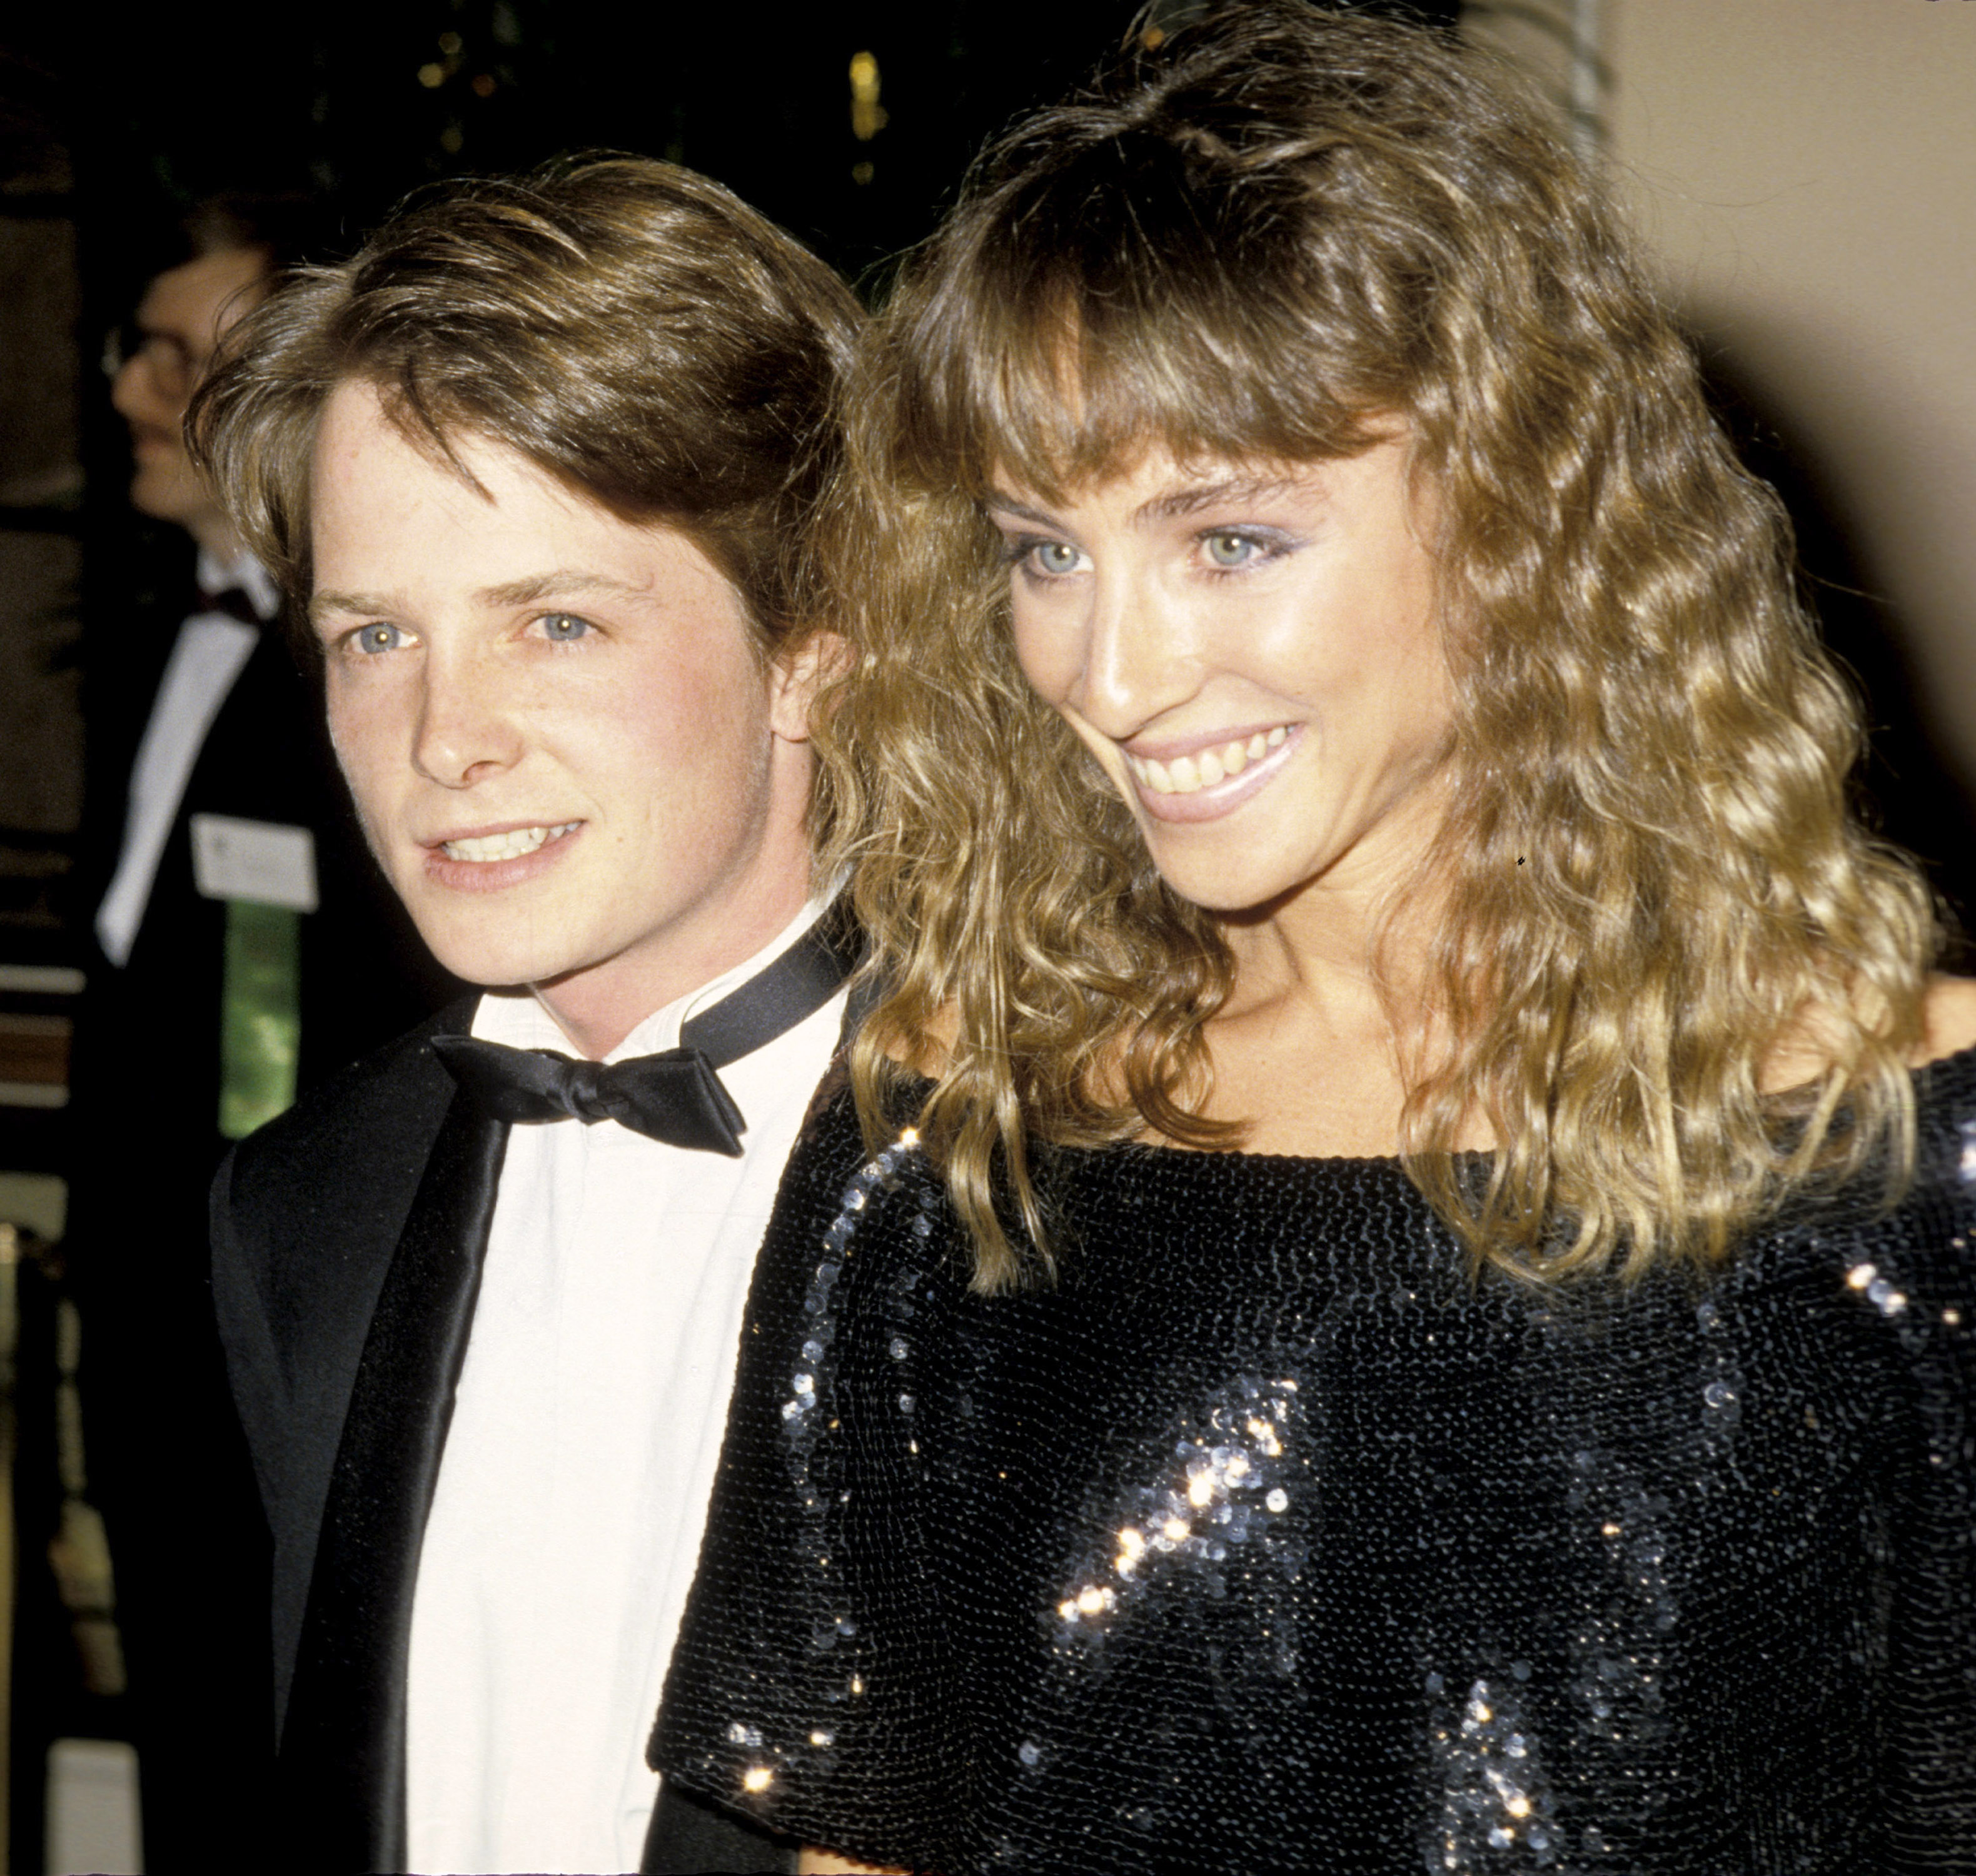 Tracy Pollan and Michael J. Fox attend the 43rd Annual Golden Globe Awards | Source: Getty Images